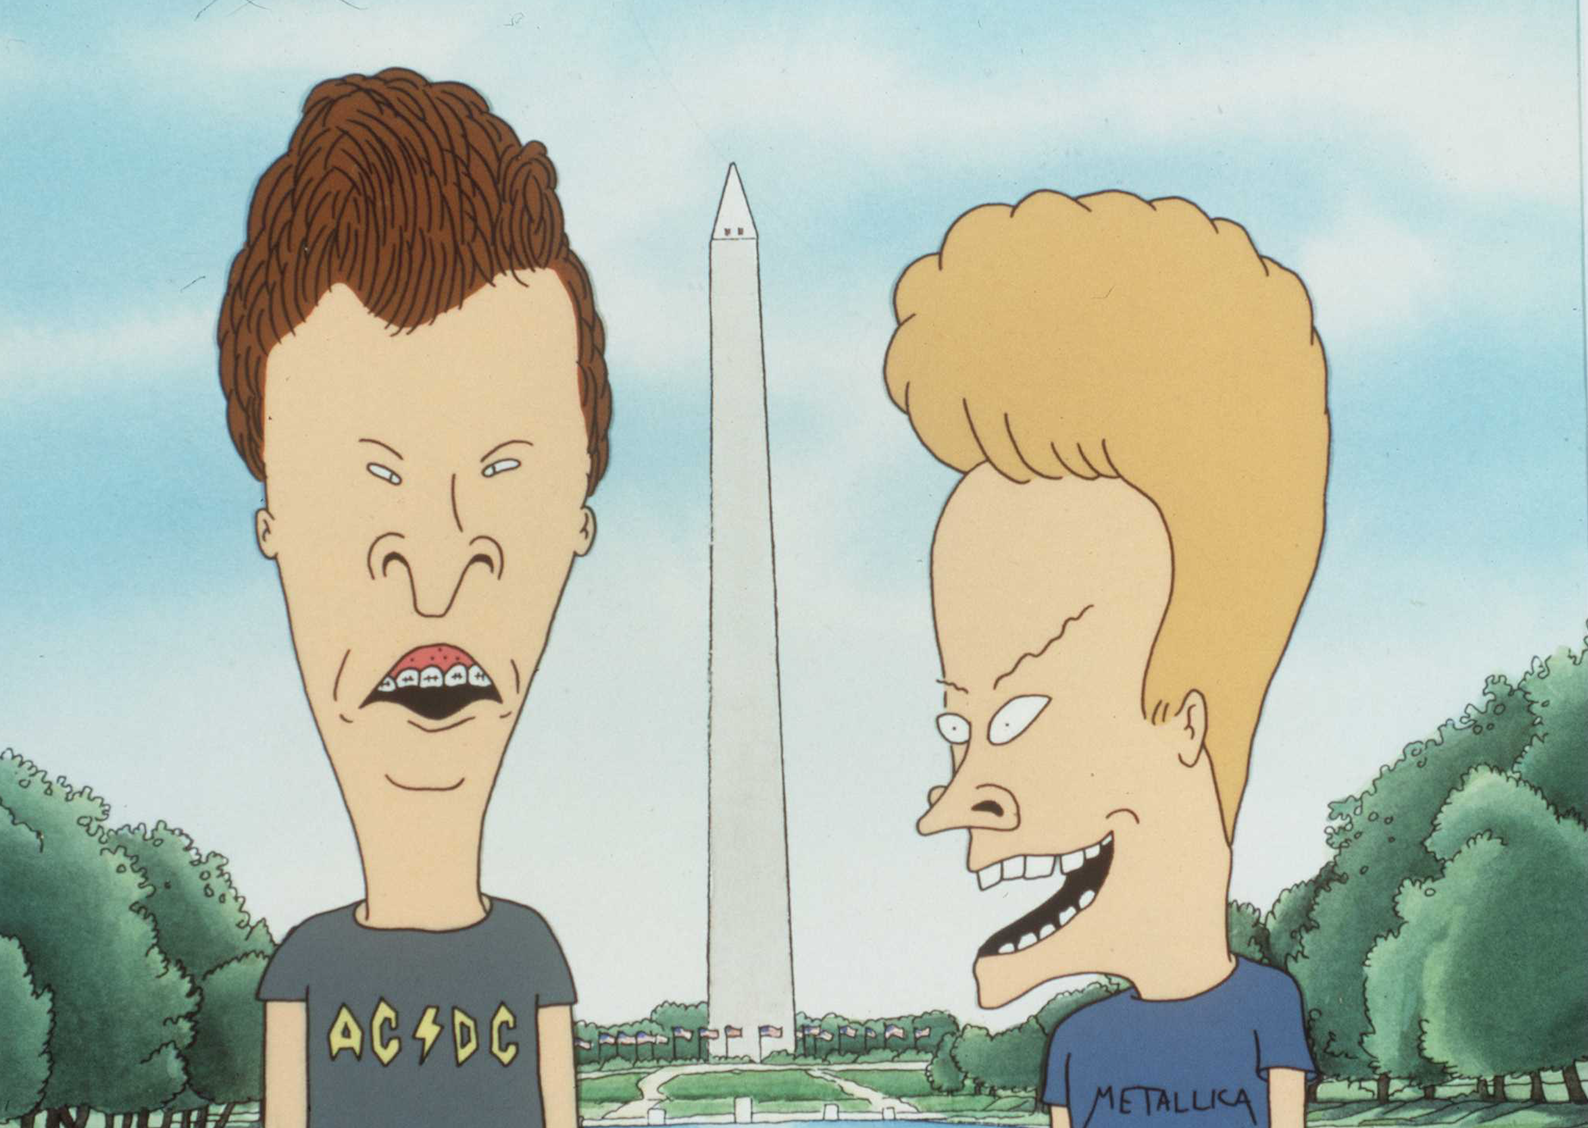 A Job Hunting Tip From 'Beavis and Butthead'